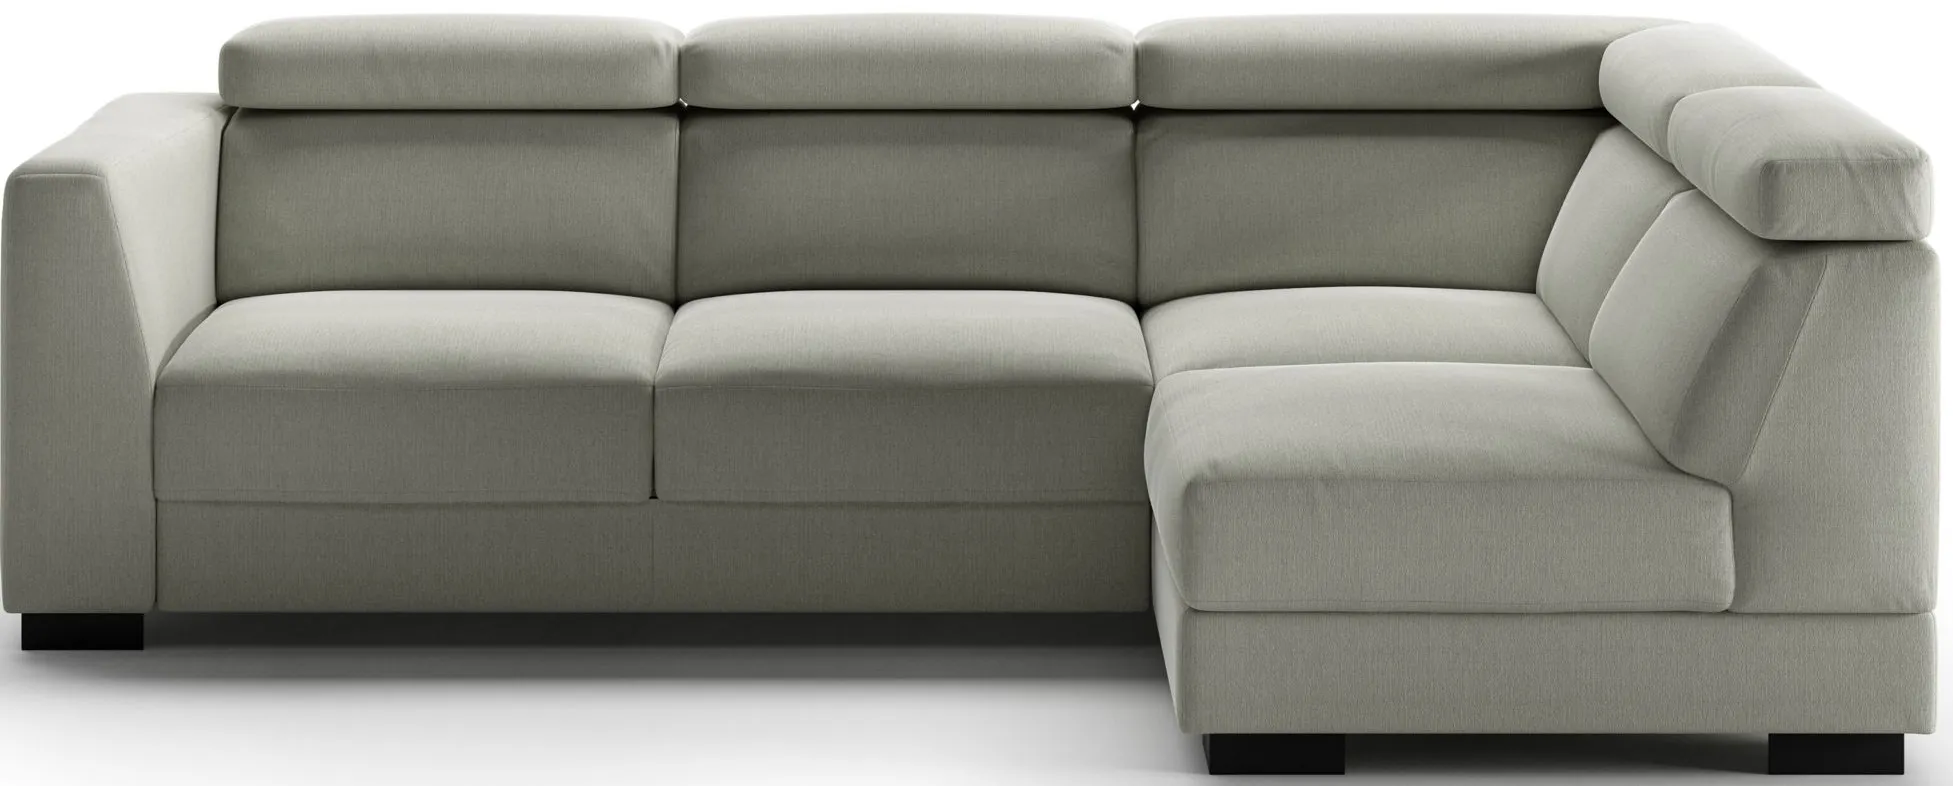 Halti Full XL Sectional Sleeper (LHF Loveseat + RHF Chaise) in Lens 700 by Luonto Furniture